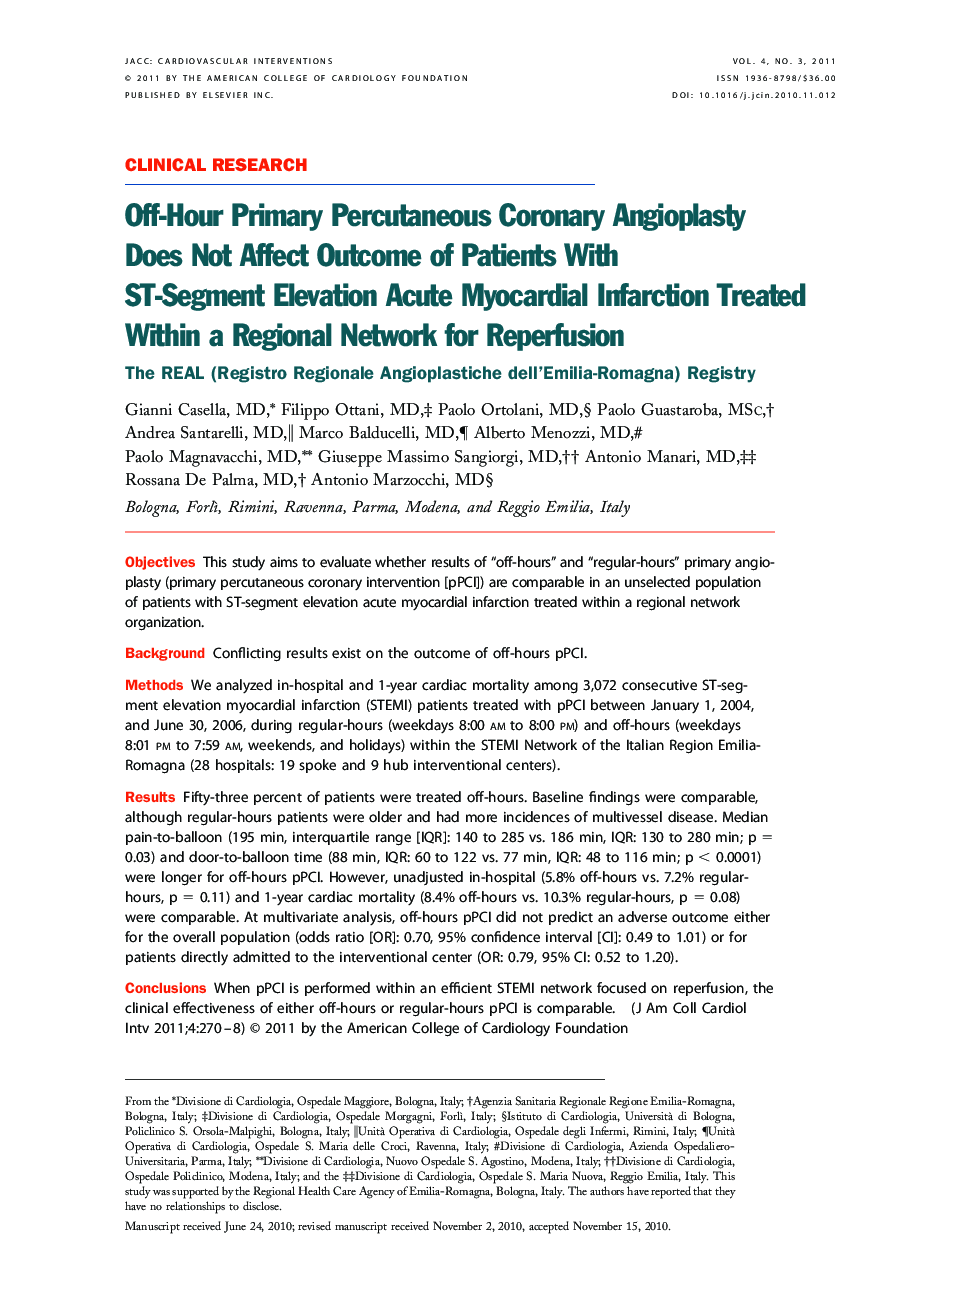 Off-Hour Primary Percutaneous Coronary Angioplasty Does Not Affect Outcome of Patients With ST-Segment Elevation Acute Myocardial Infarction Treated Within a Regional Network for Reperfusion : The REAL (Registro Regionale Angioplastiche dell'Emilia-Romagn